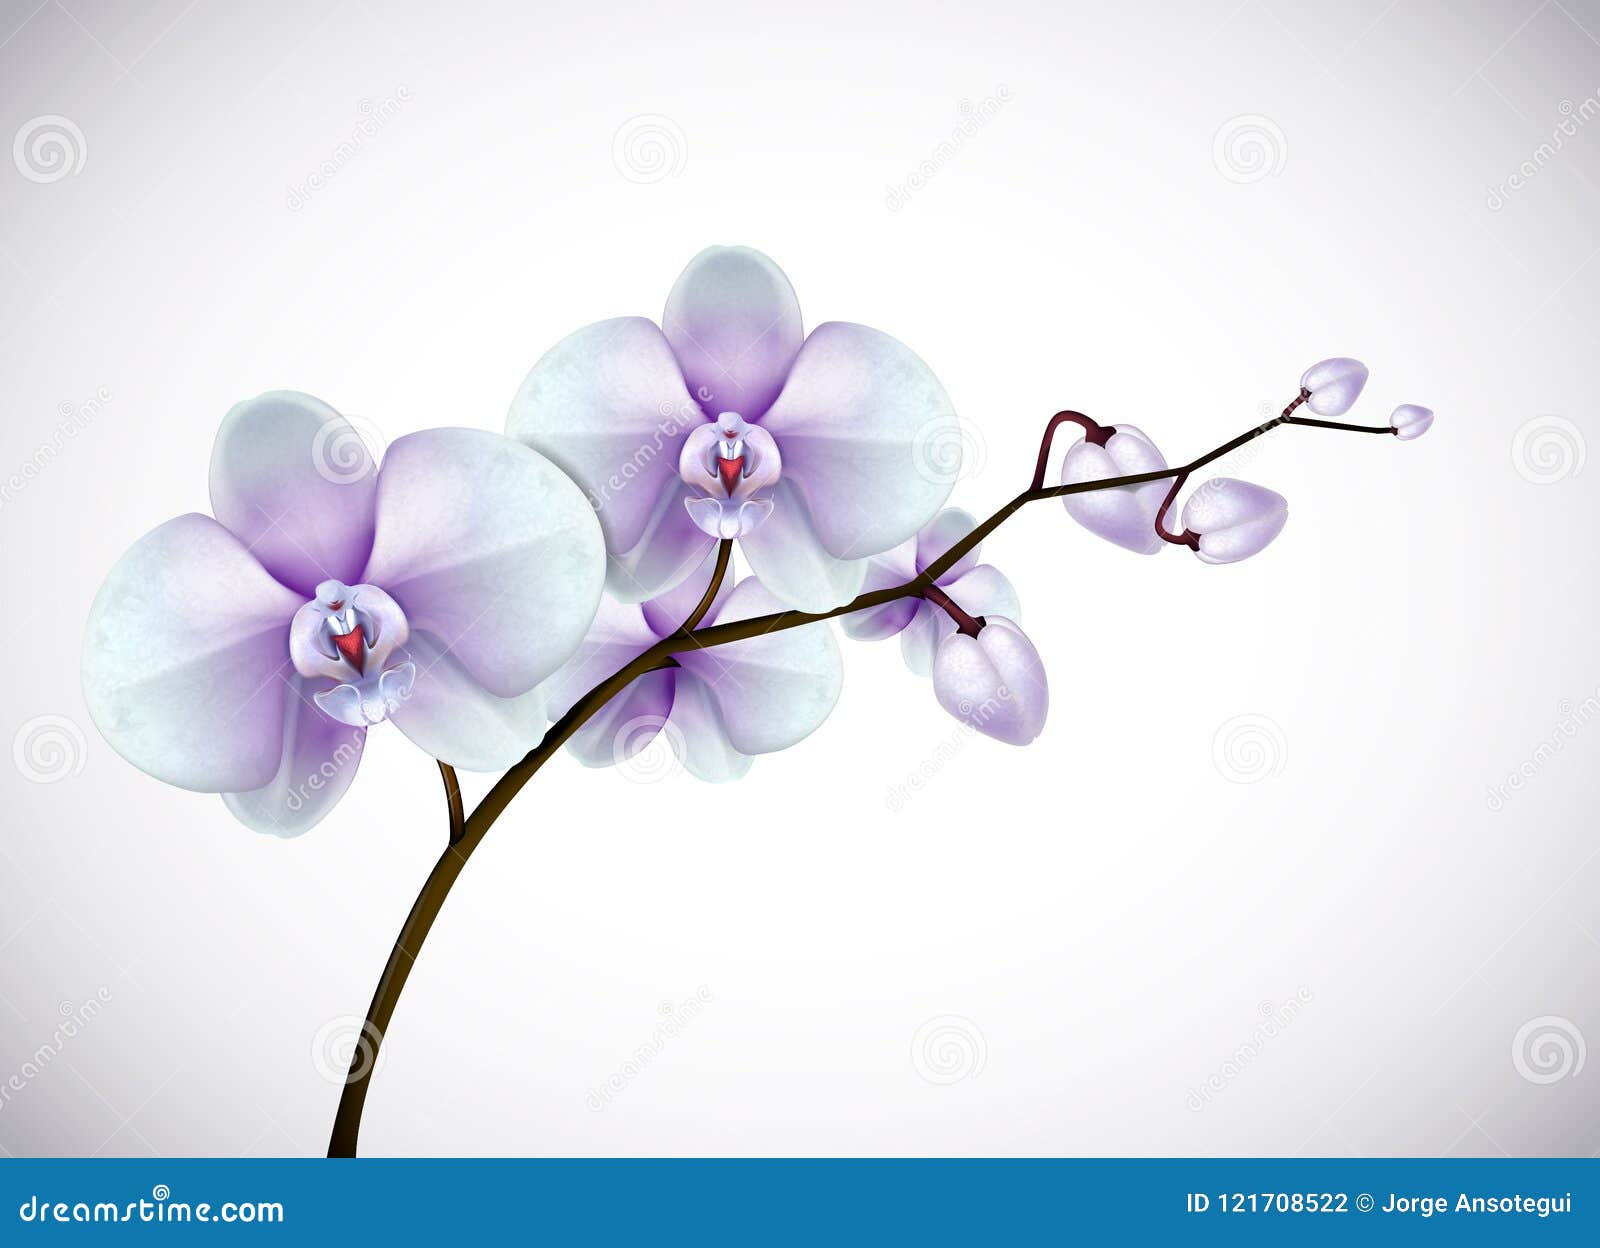 beautiful three day old white and purple orchids flowers in bran